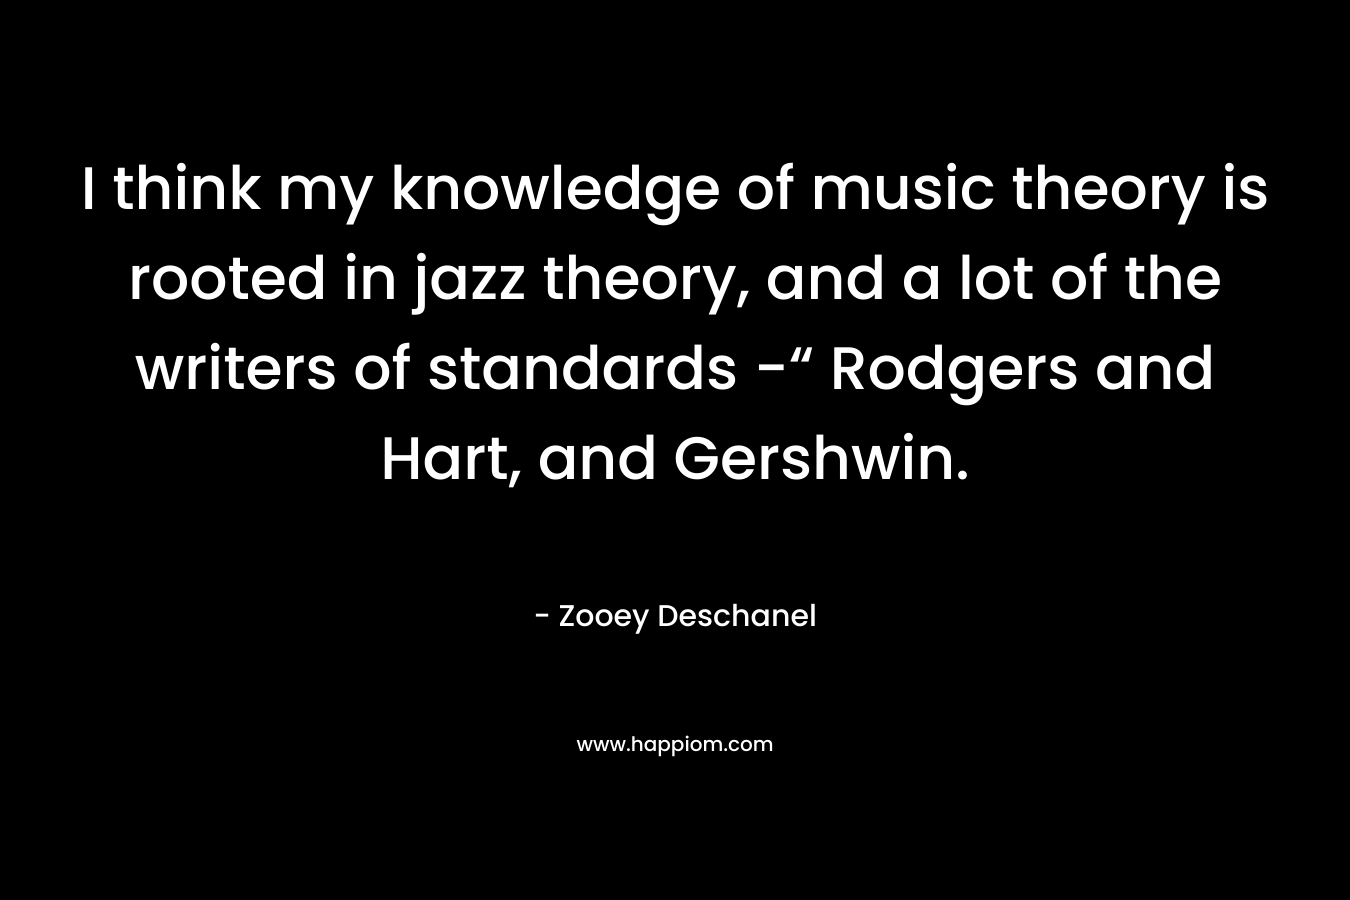 I think my knowledge of music theory is rooted in jazz theory, and a lot of the writers of standards -“ Rodgers and Hart, and Gershwin. – Zooey Deschanel